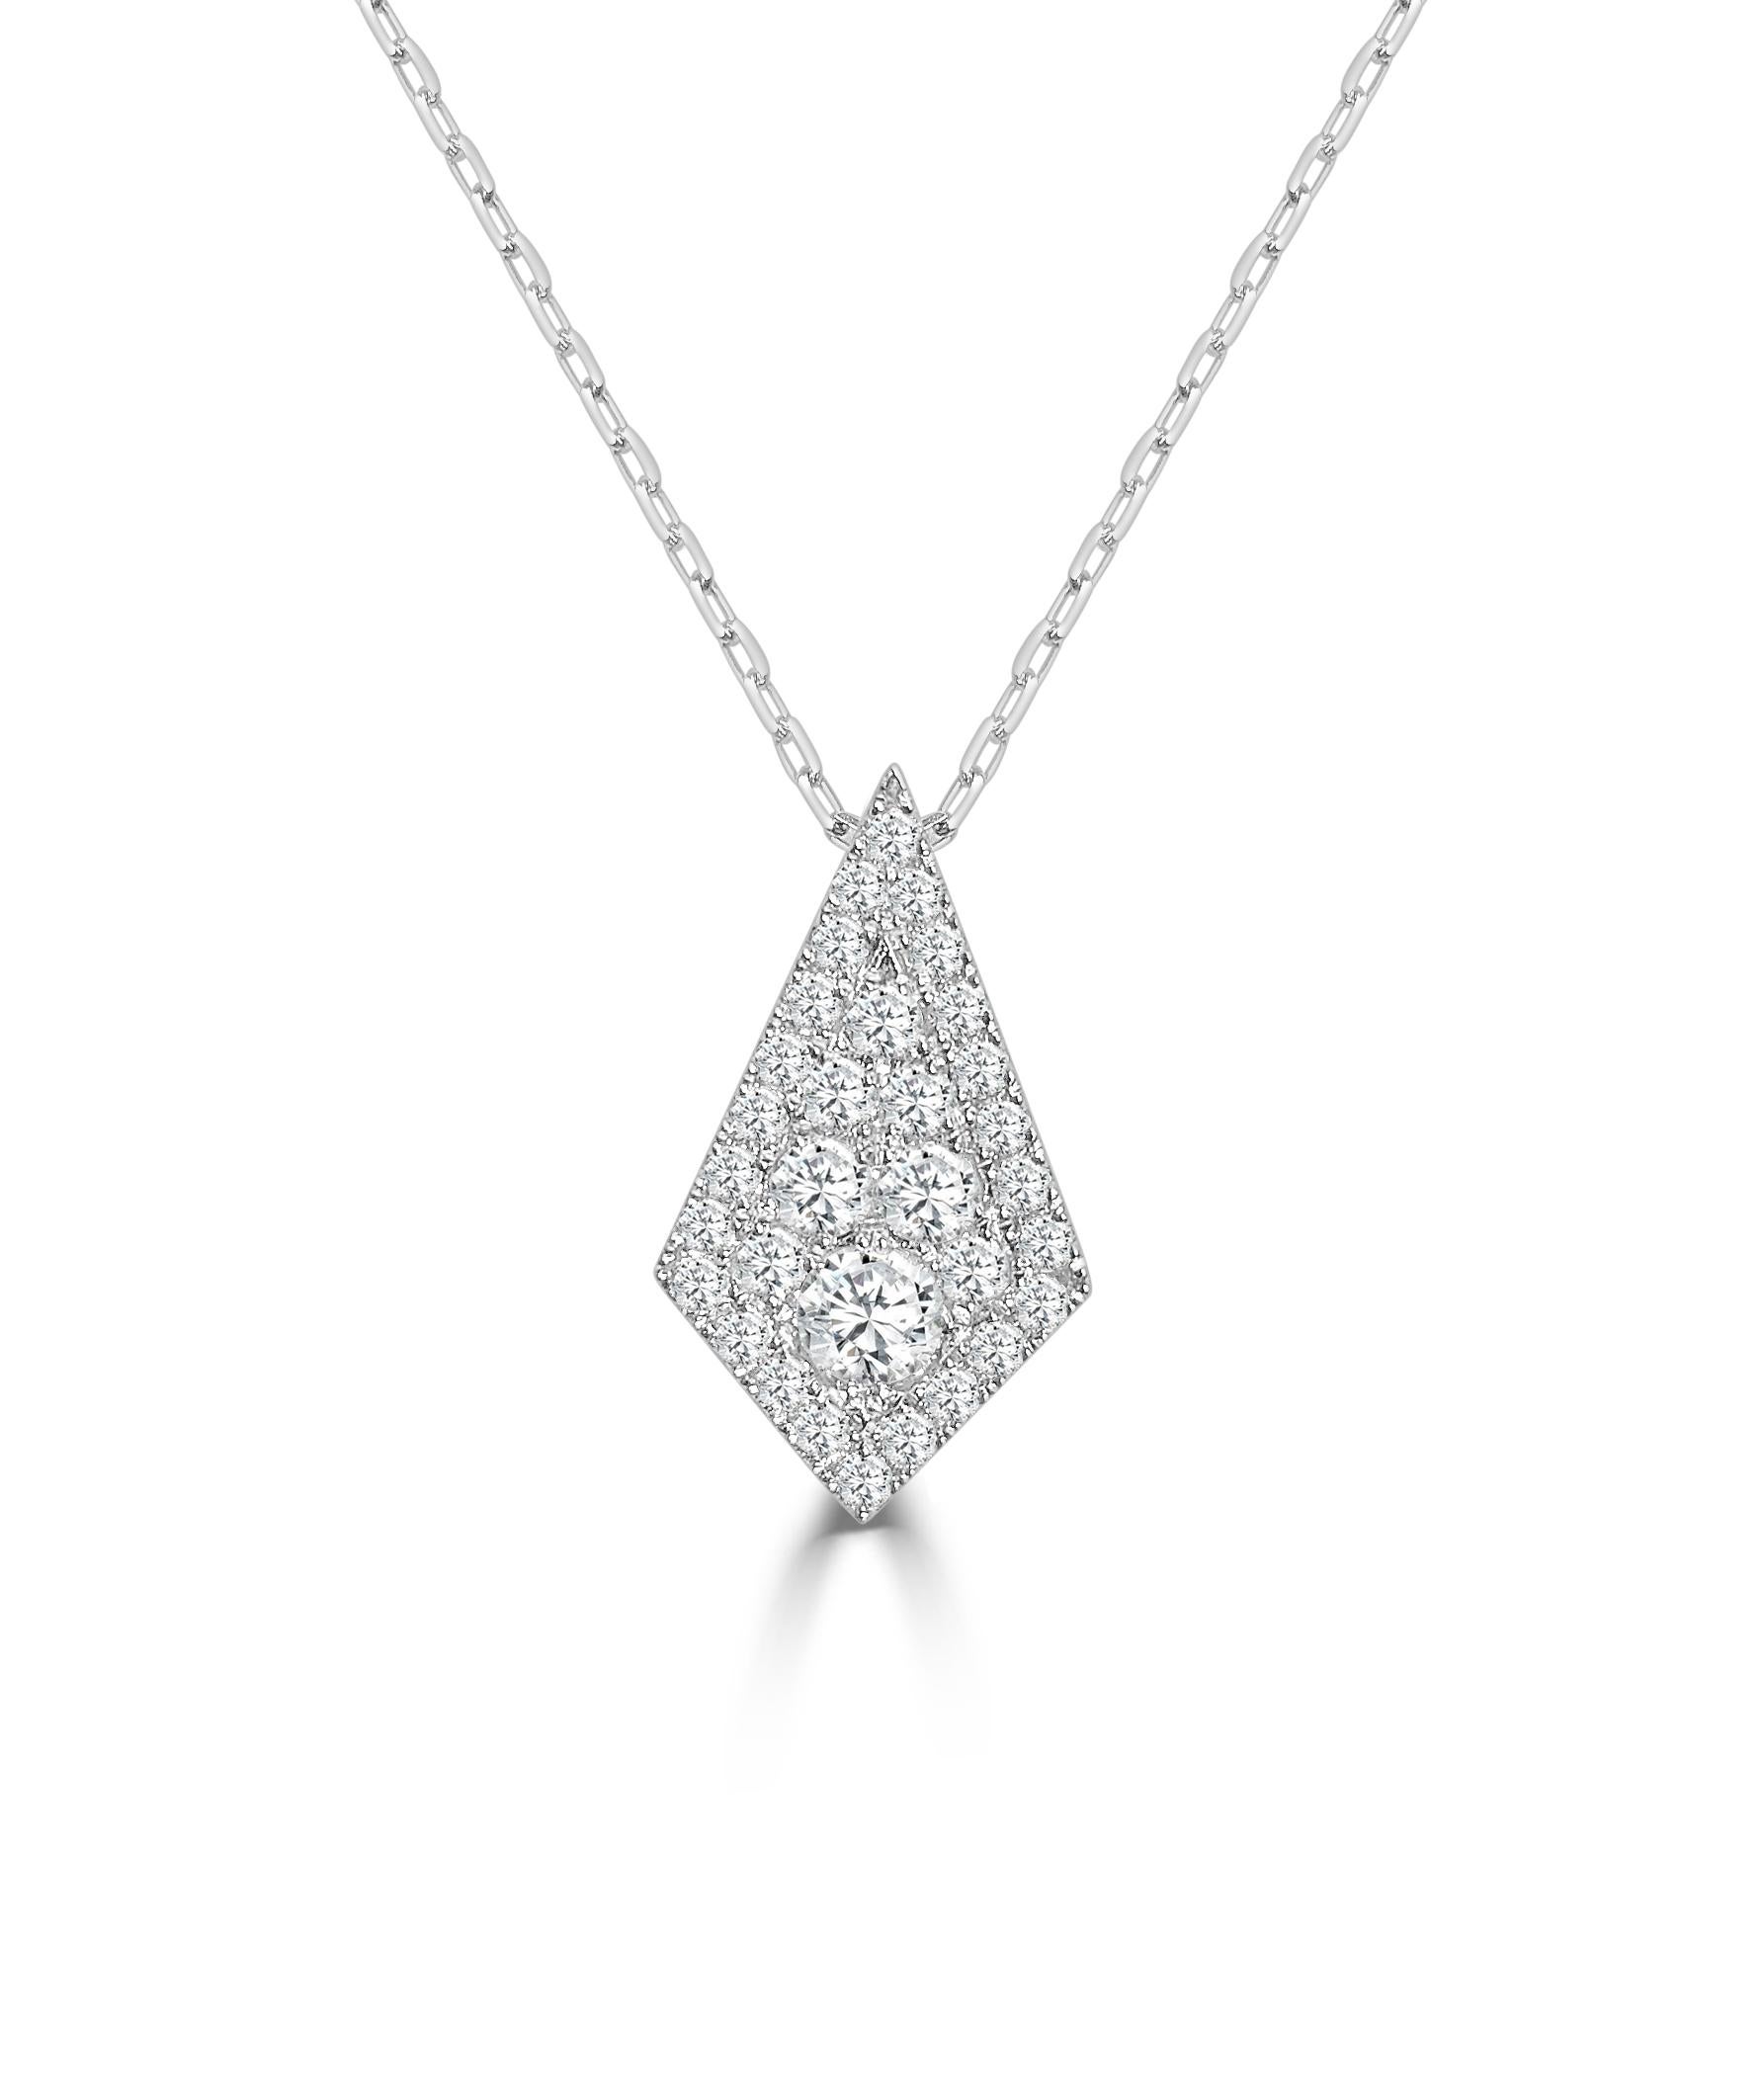 Extra Large Kite Shaped Firenze II Pendant With Chain, 0.89 Ct. approximately 11 mm x 20 mm

Available in other metal/ gemstone options: This Diamond pendant can be made in white, pink or yellow gold. 
Matching earrings, bangle and ring available or